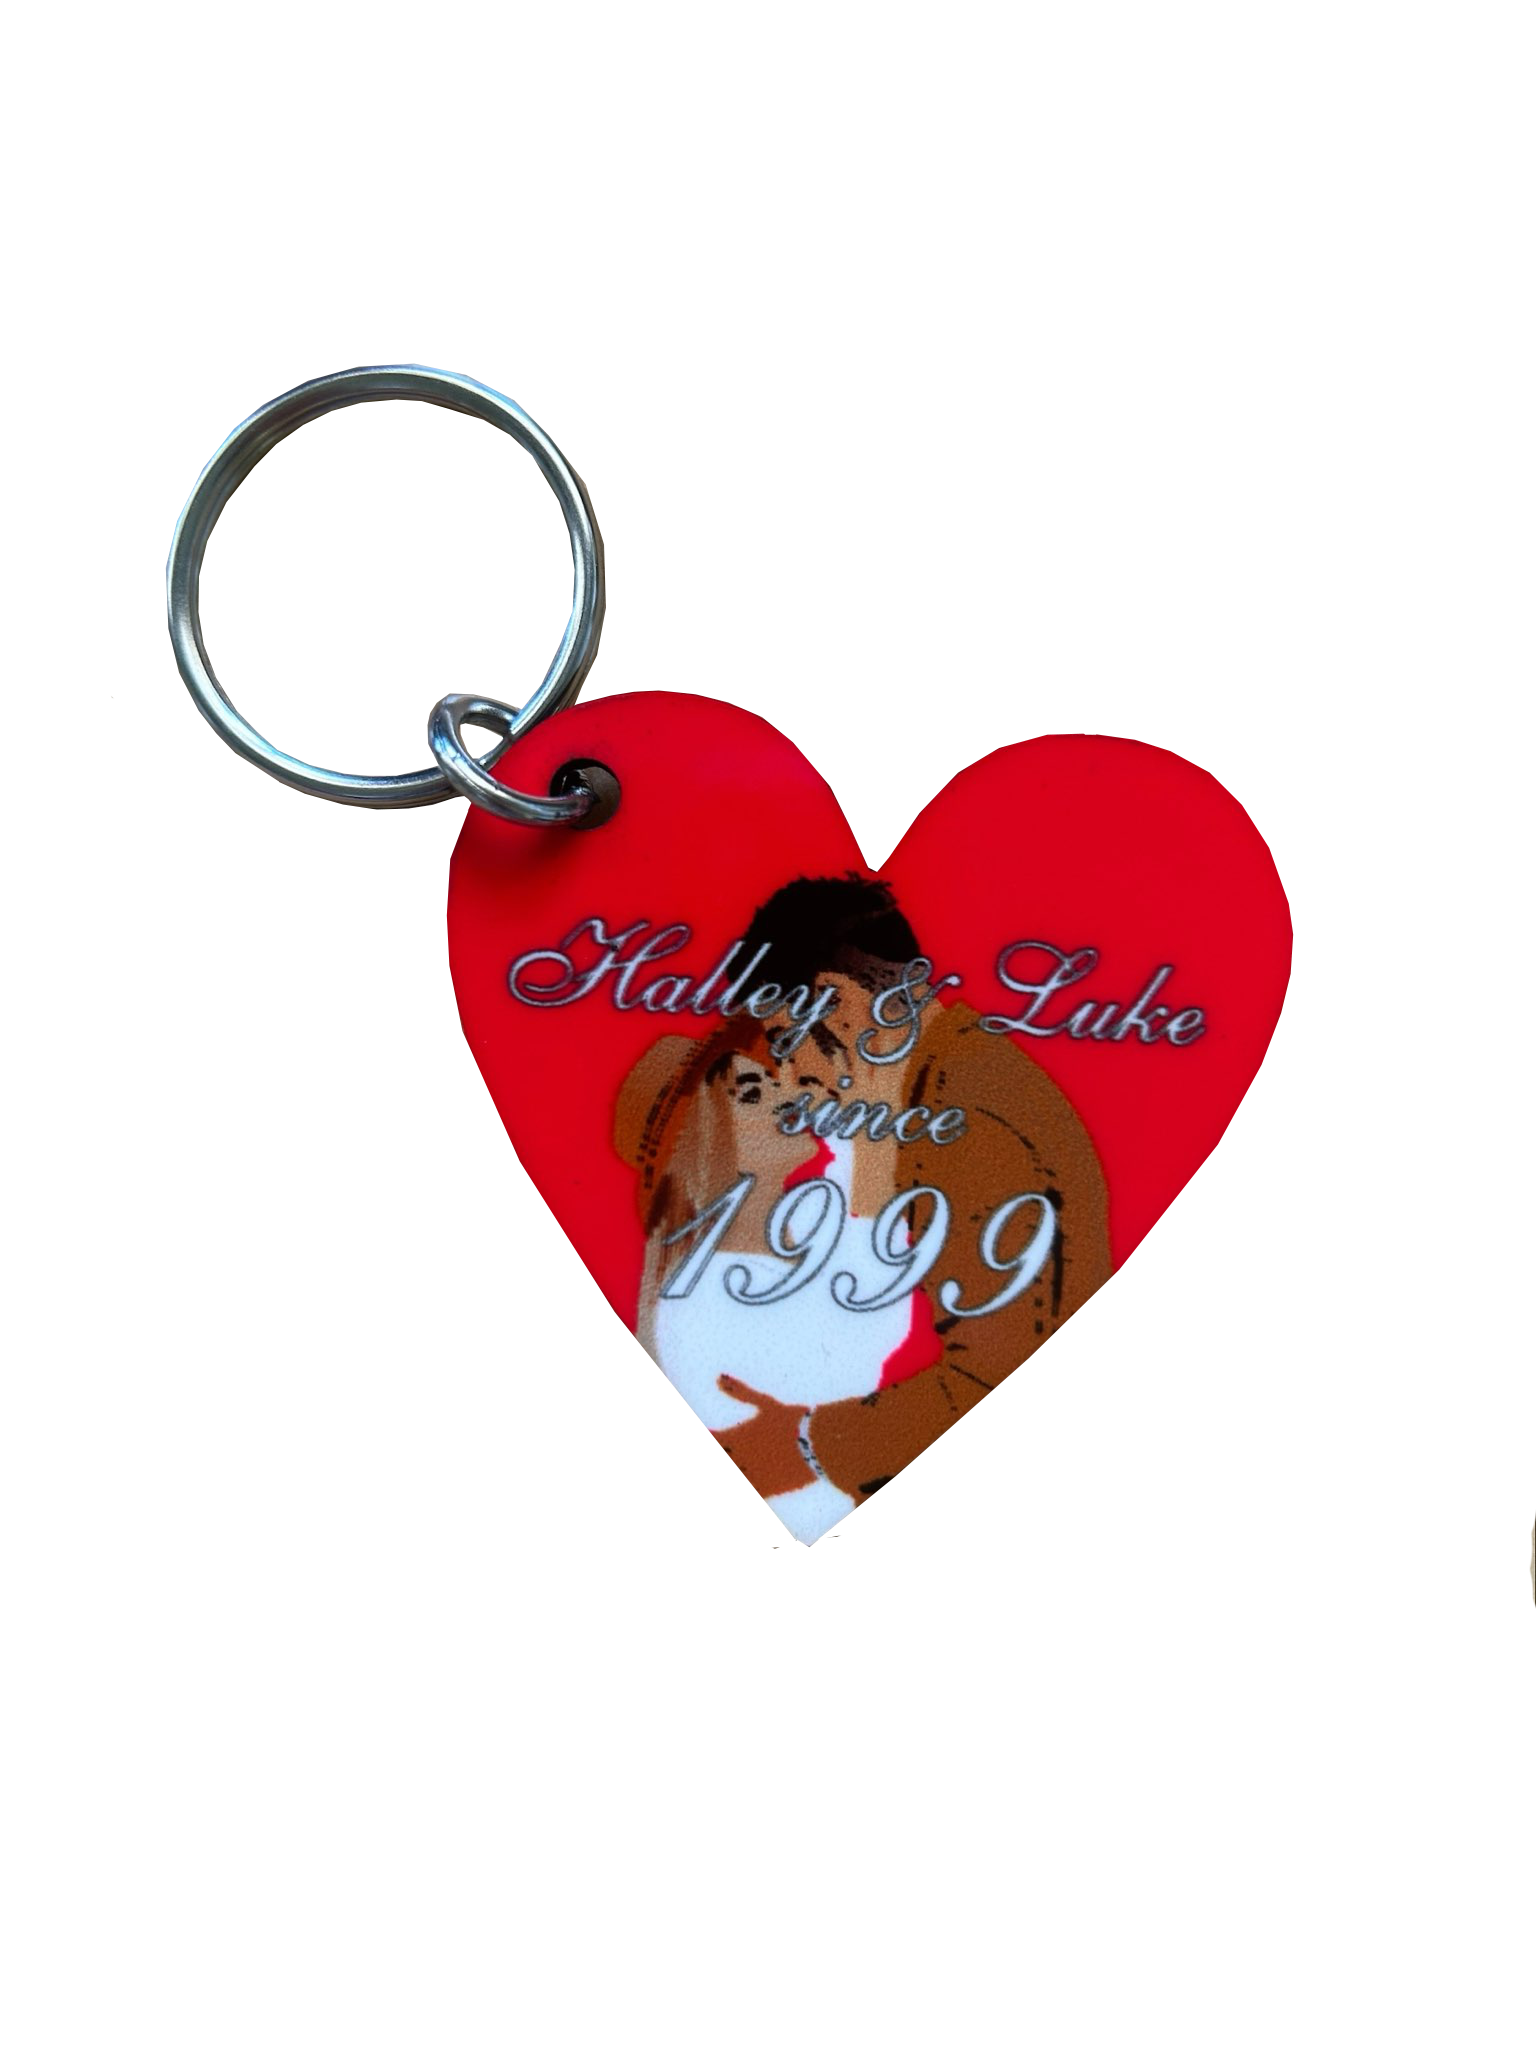 Customisable Heart keychain Buy one get one FREE!! (55mm X 55mm)